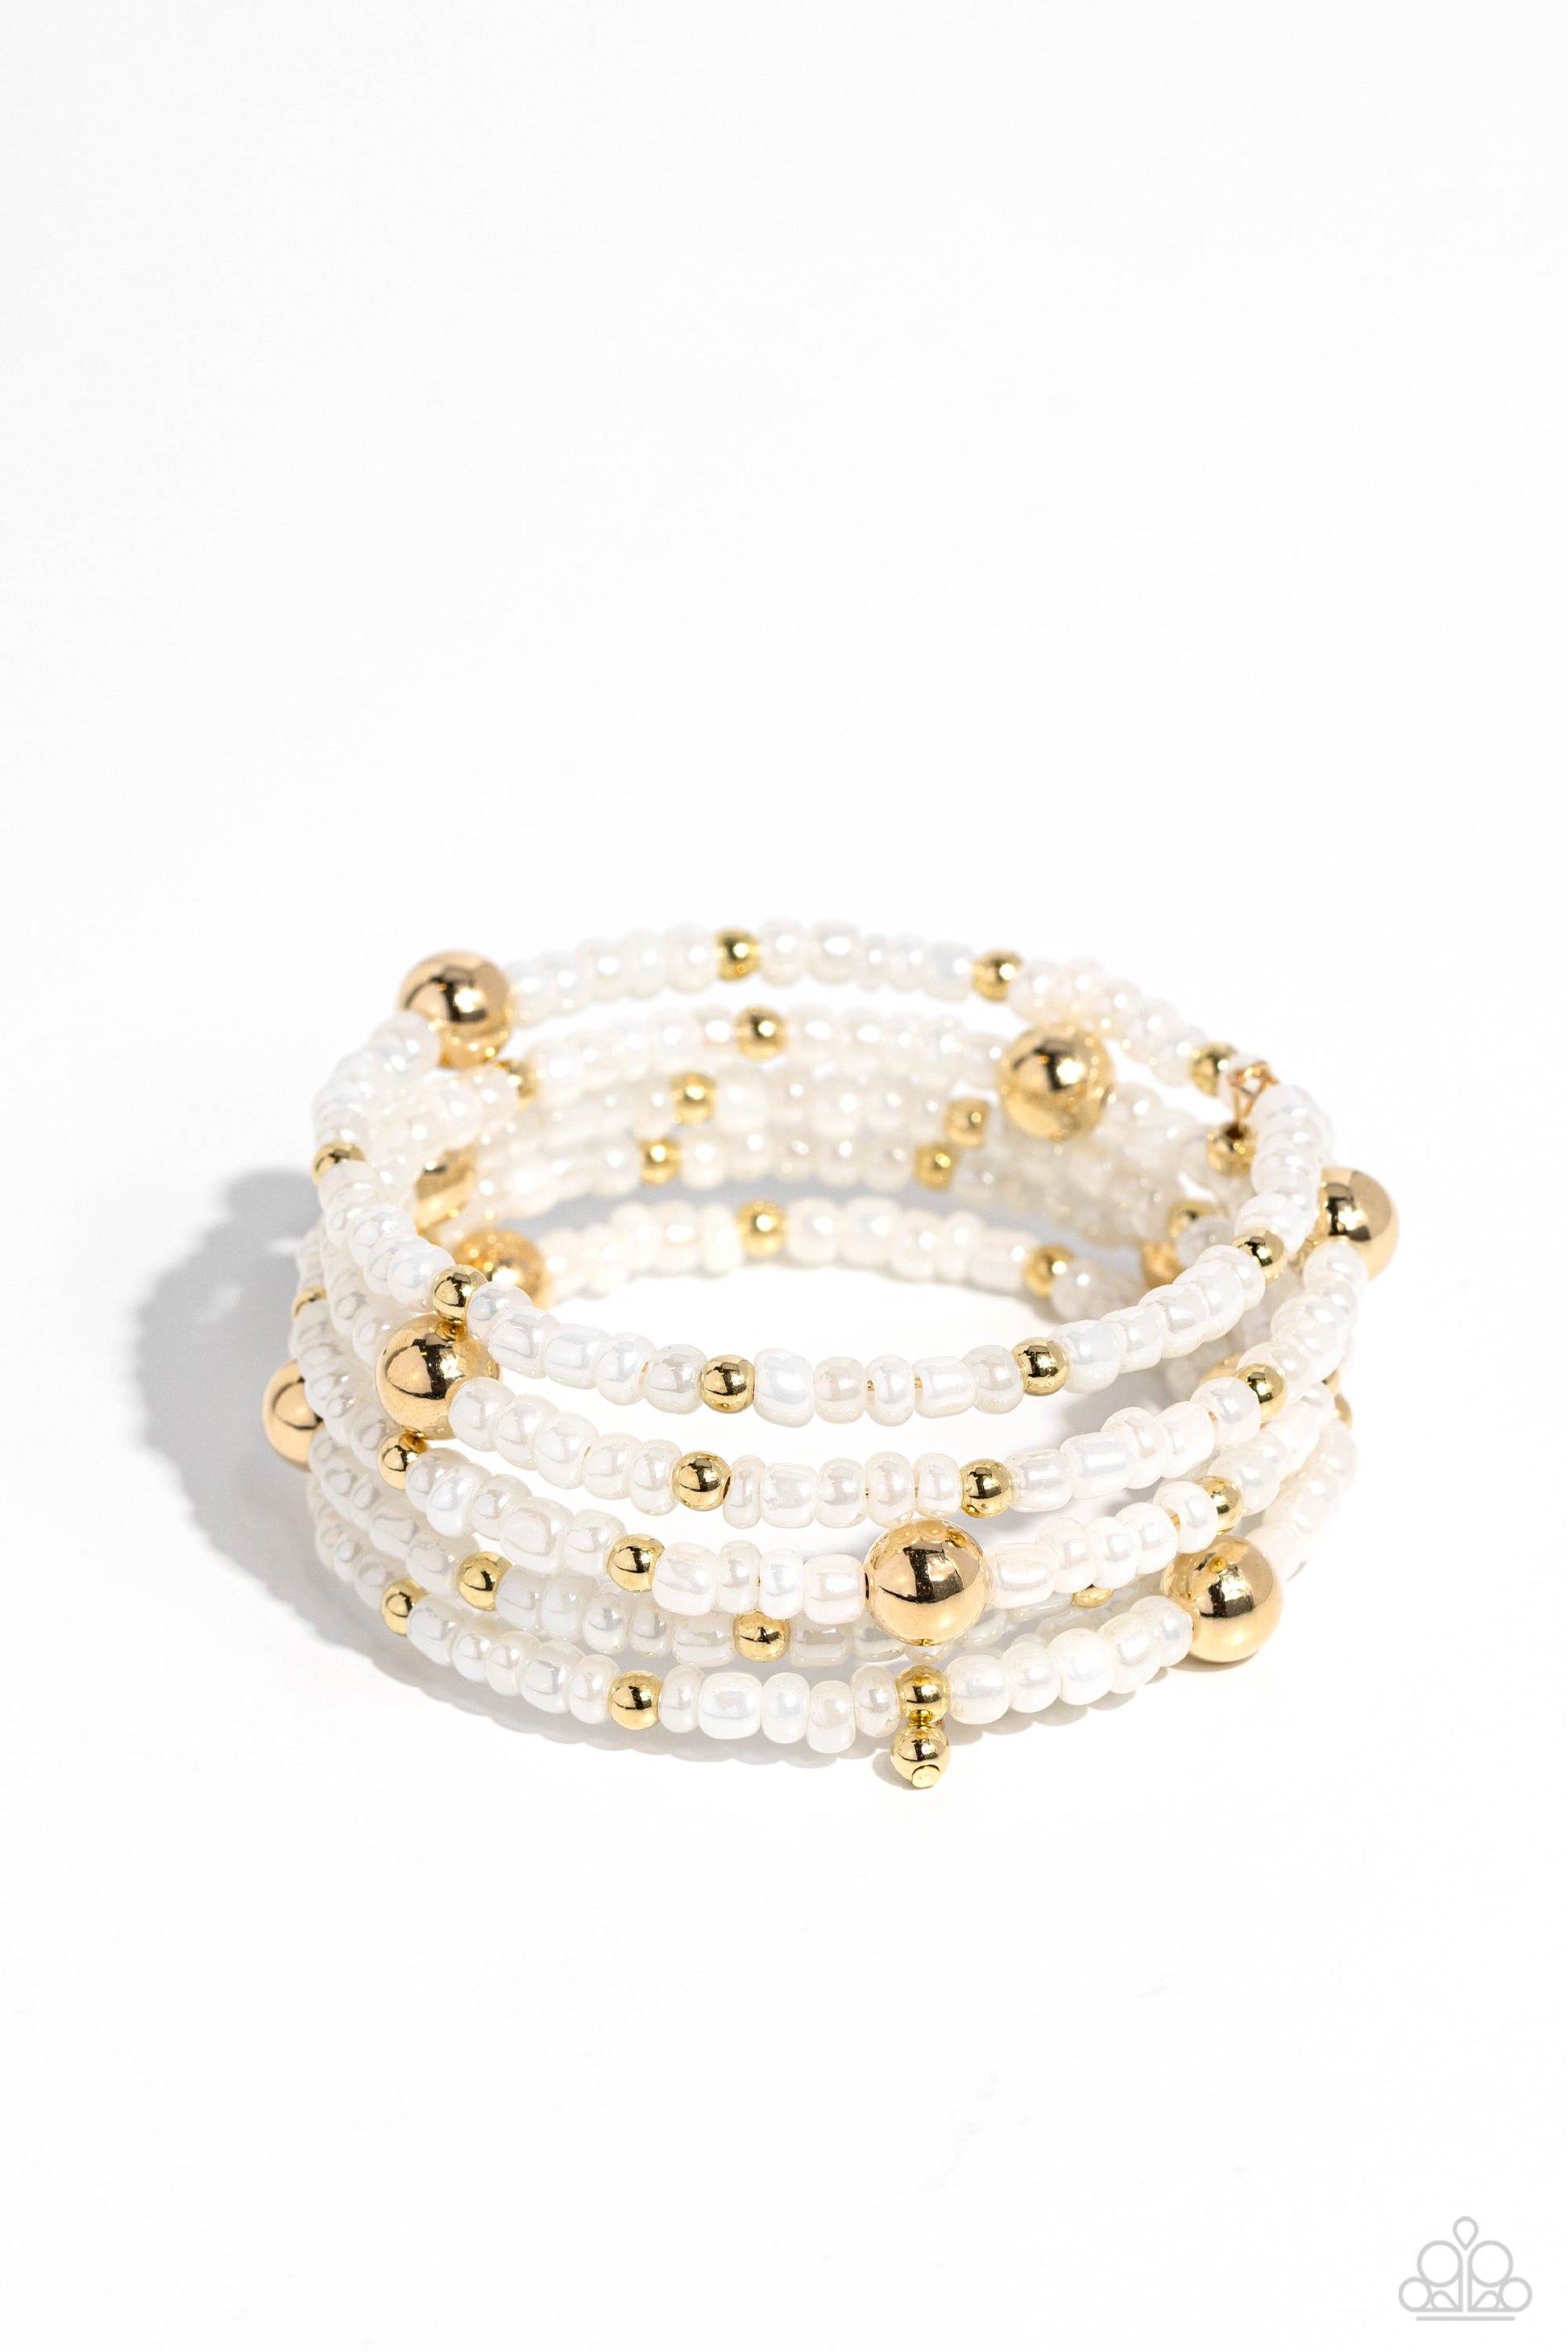 Refined Retrograde Gold Coil Bracelet - Paparazzi Accessories  Pearly white seed beads, and various-sized gold accents are threaded along a coiled wire, creating a refined infinity wrap-style bracelet around the wrist.  Sold as one individual bracelet.  P9RE-GDXX-401XX